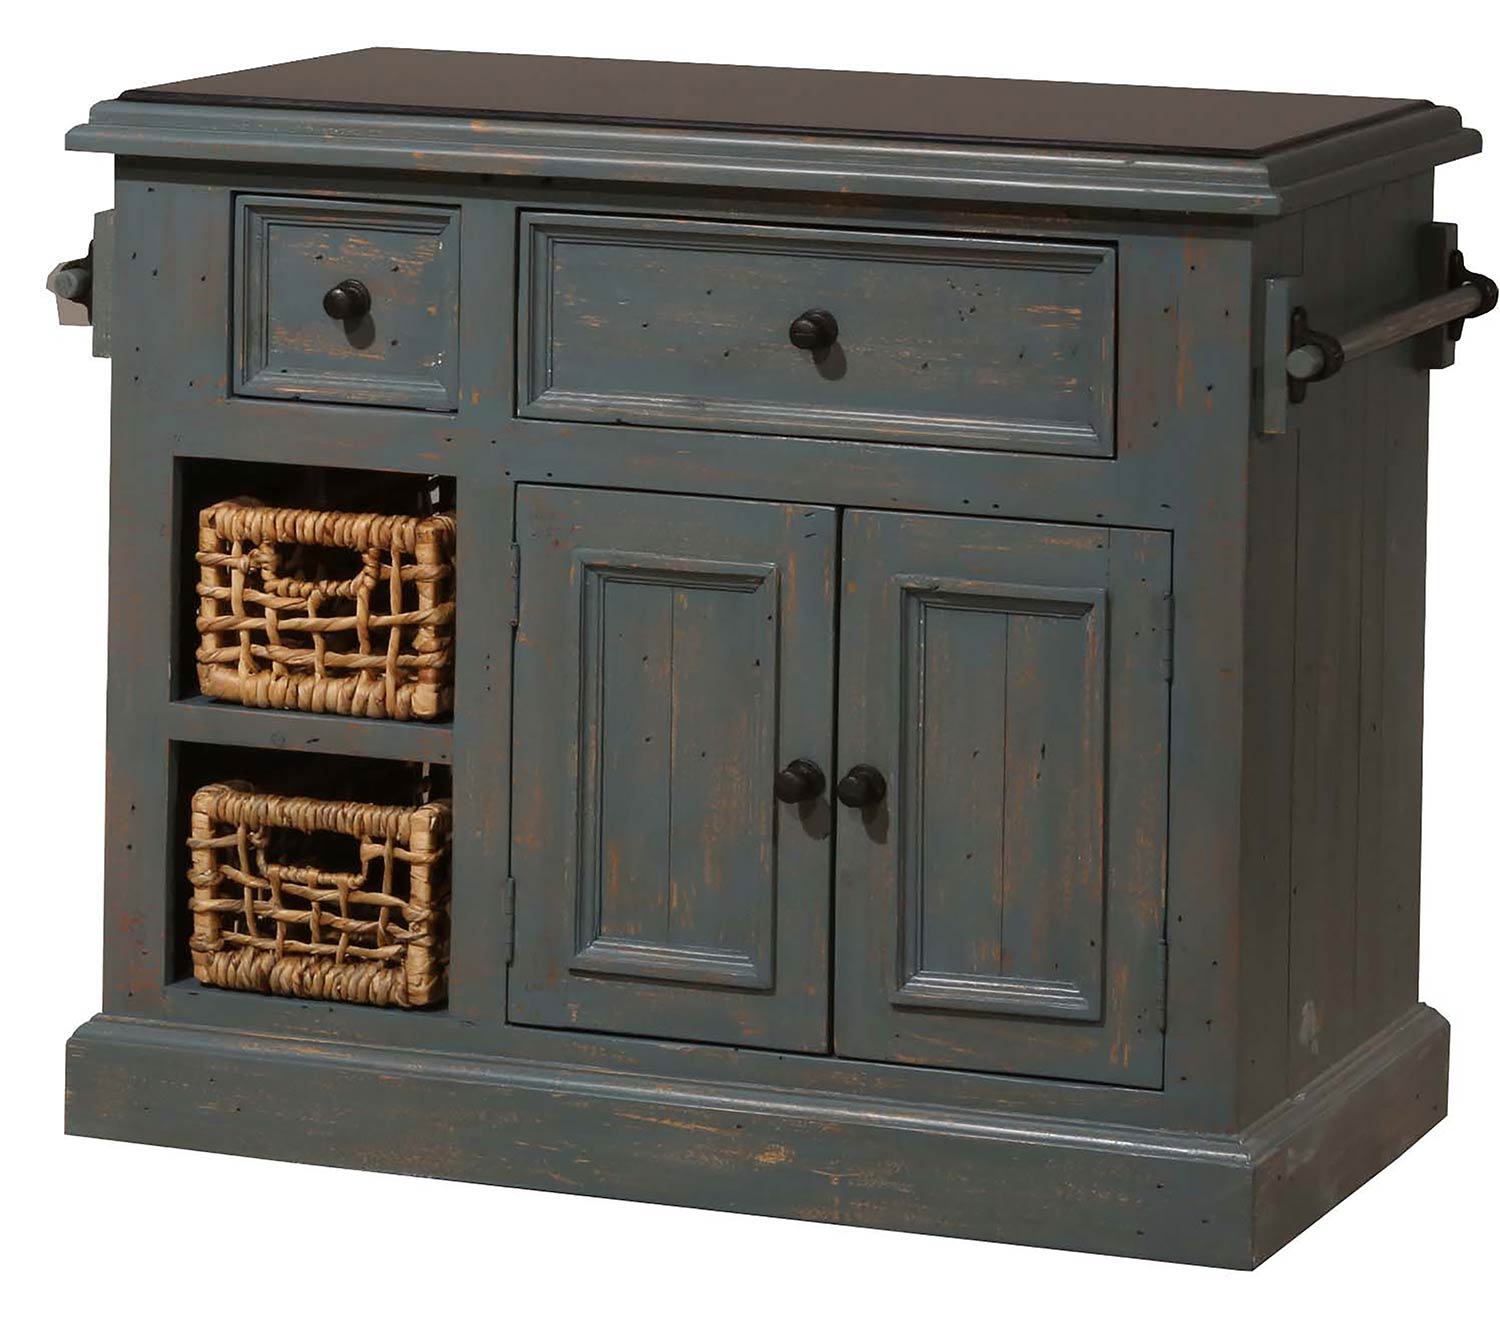 Hillsdale Tuscan Retreat Medium Kitchen Island with Two Baskets - Nordic Blue